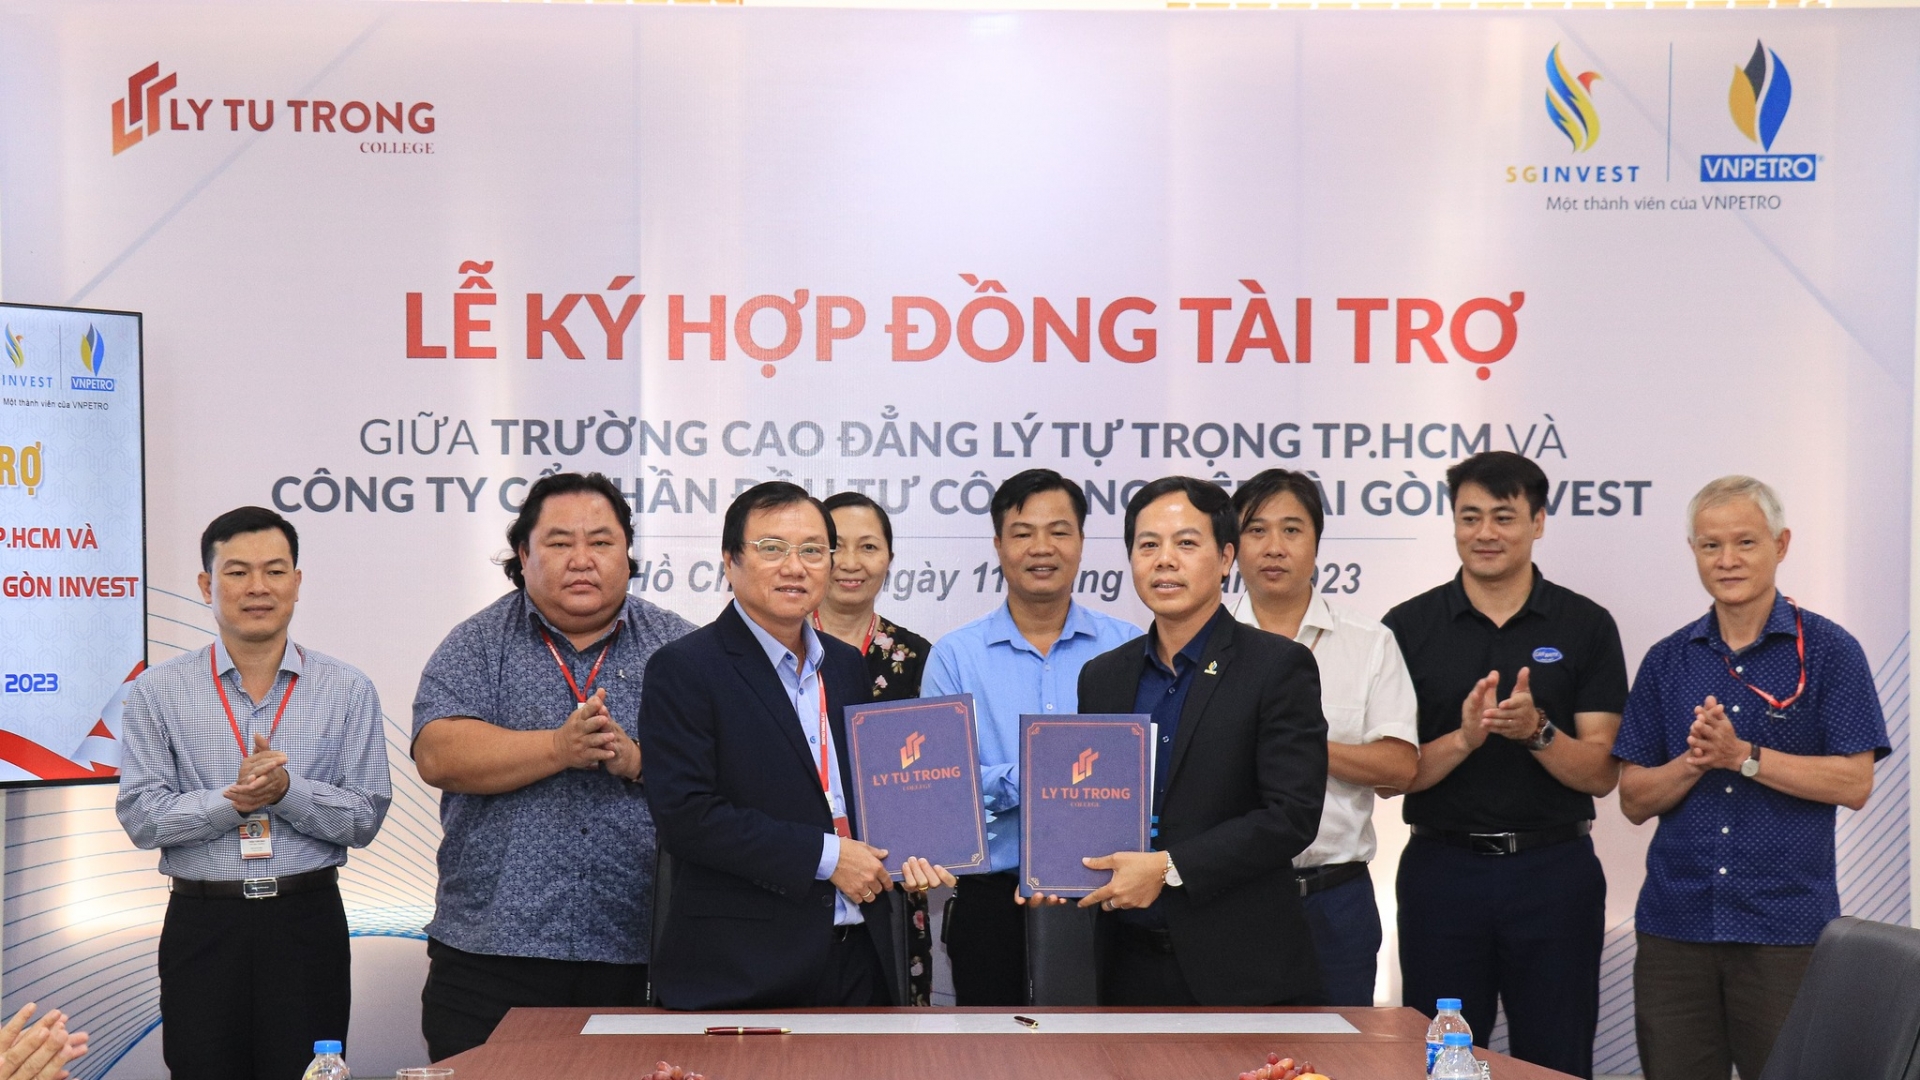 SG Invest Company - a member company of VNPETRO sponsored more than 600,000,000 VND for students of Ly Tu Trong College in Ho Chi Minh City